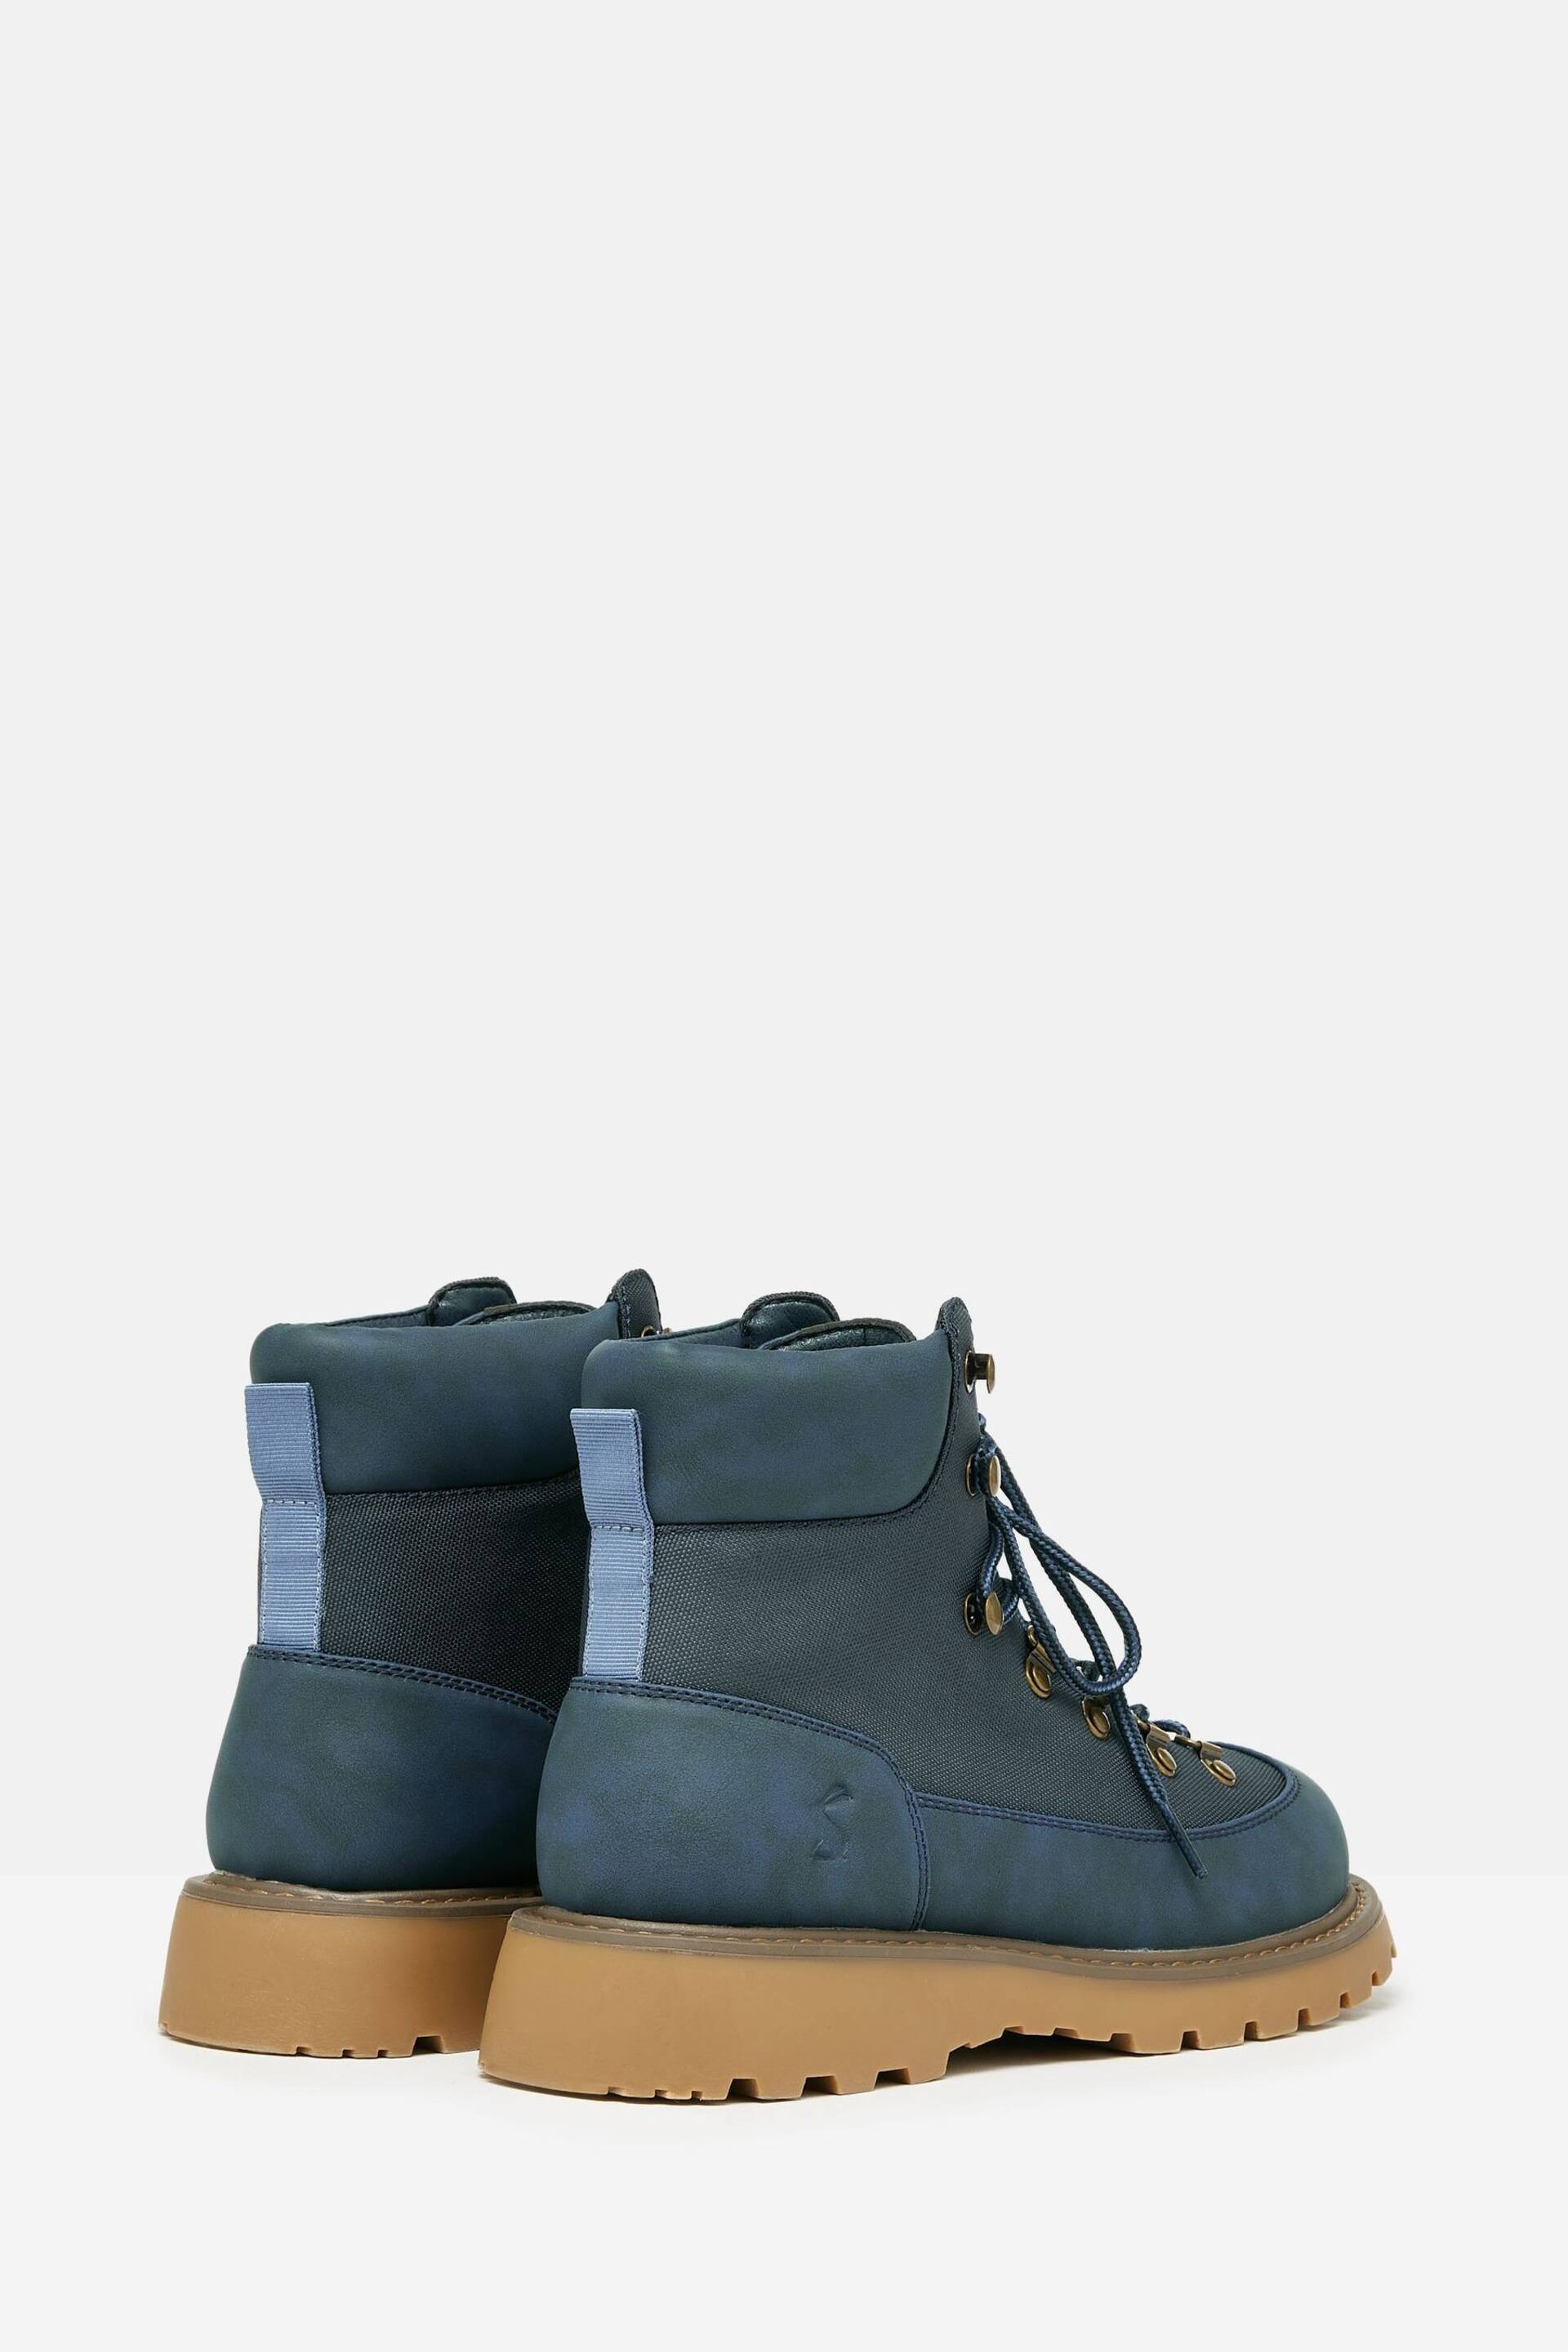 Joules Kendall Navy Lace-Up Boots - Image 3 of 8